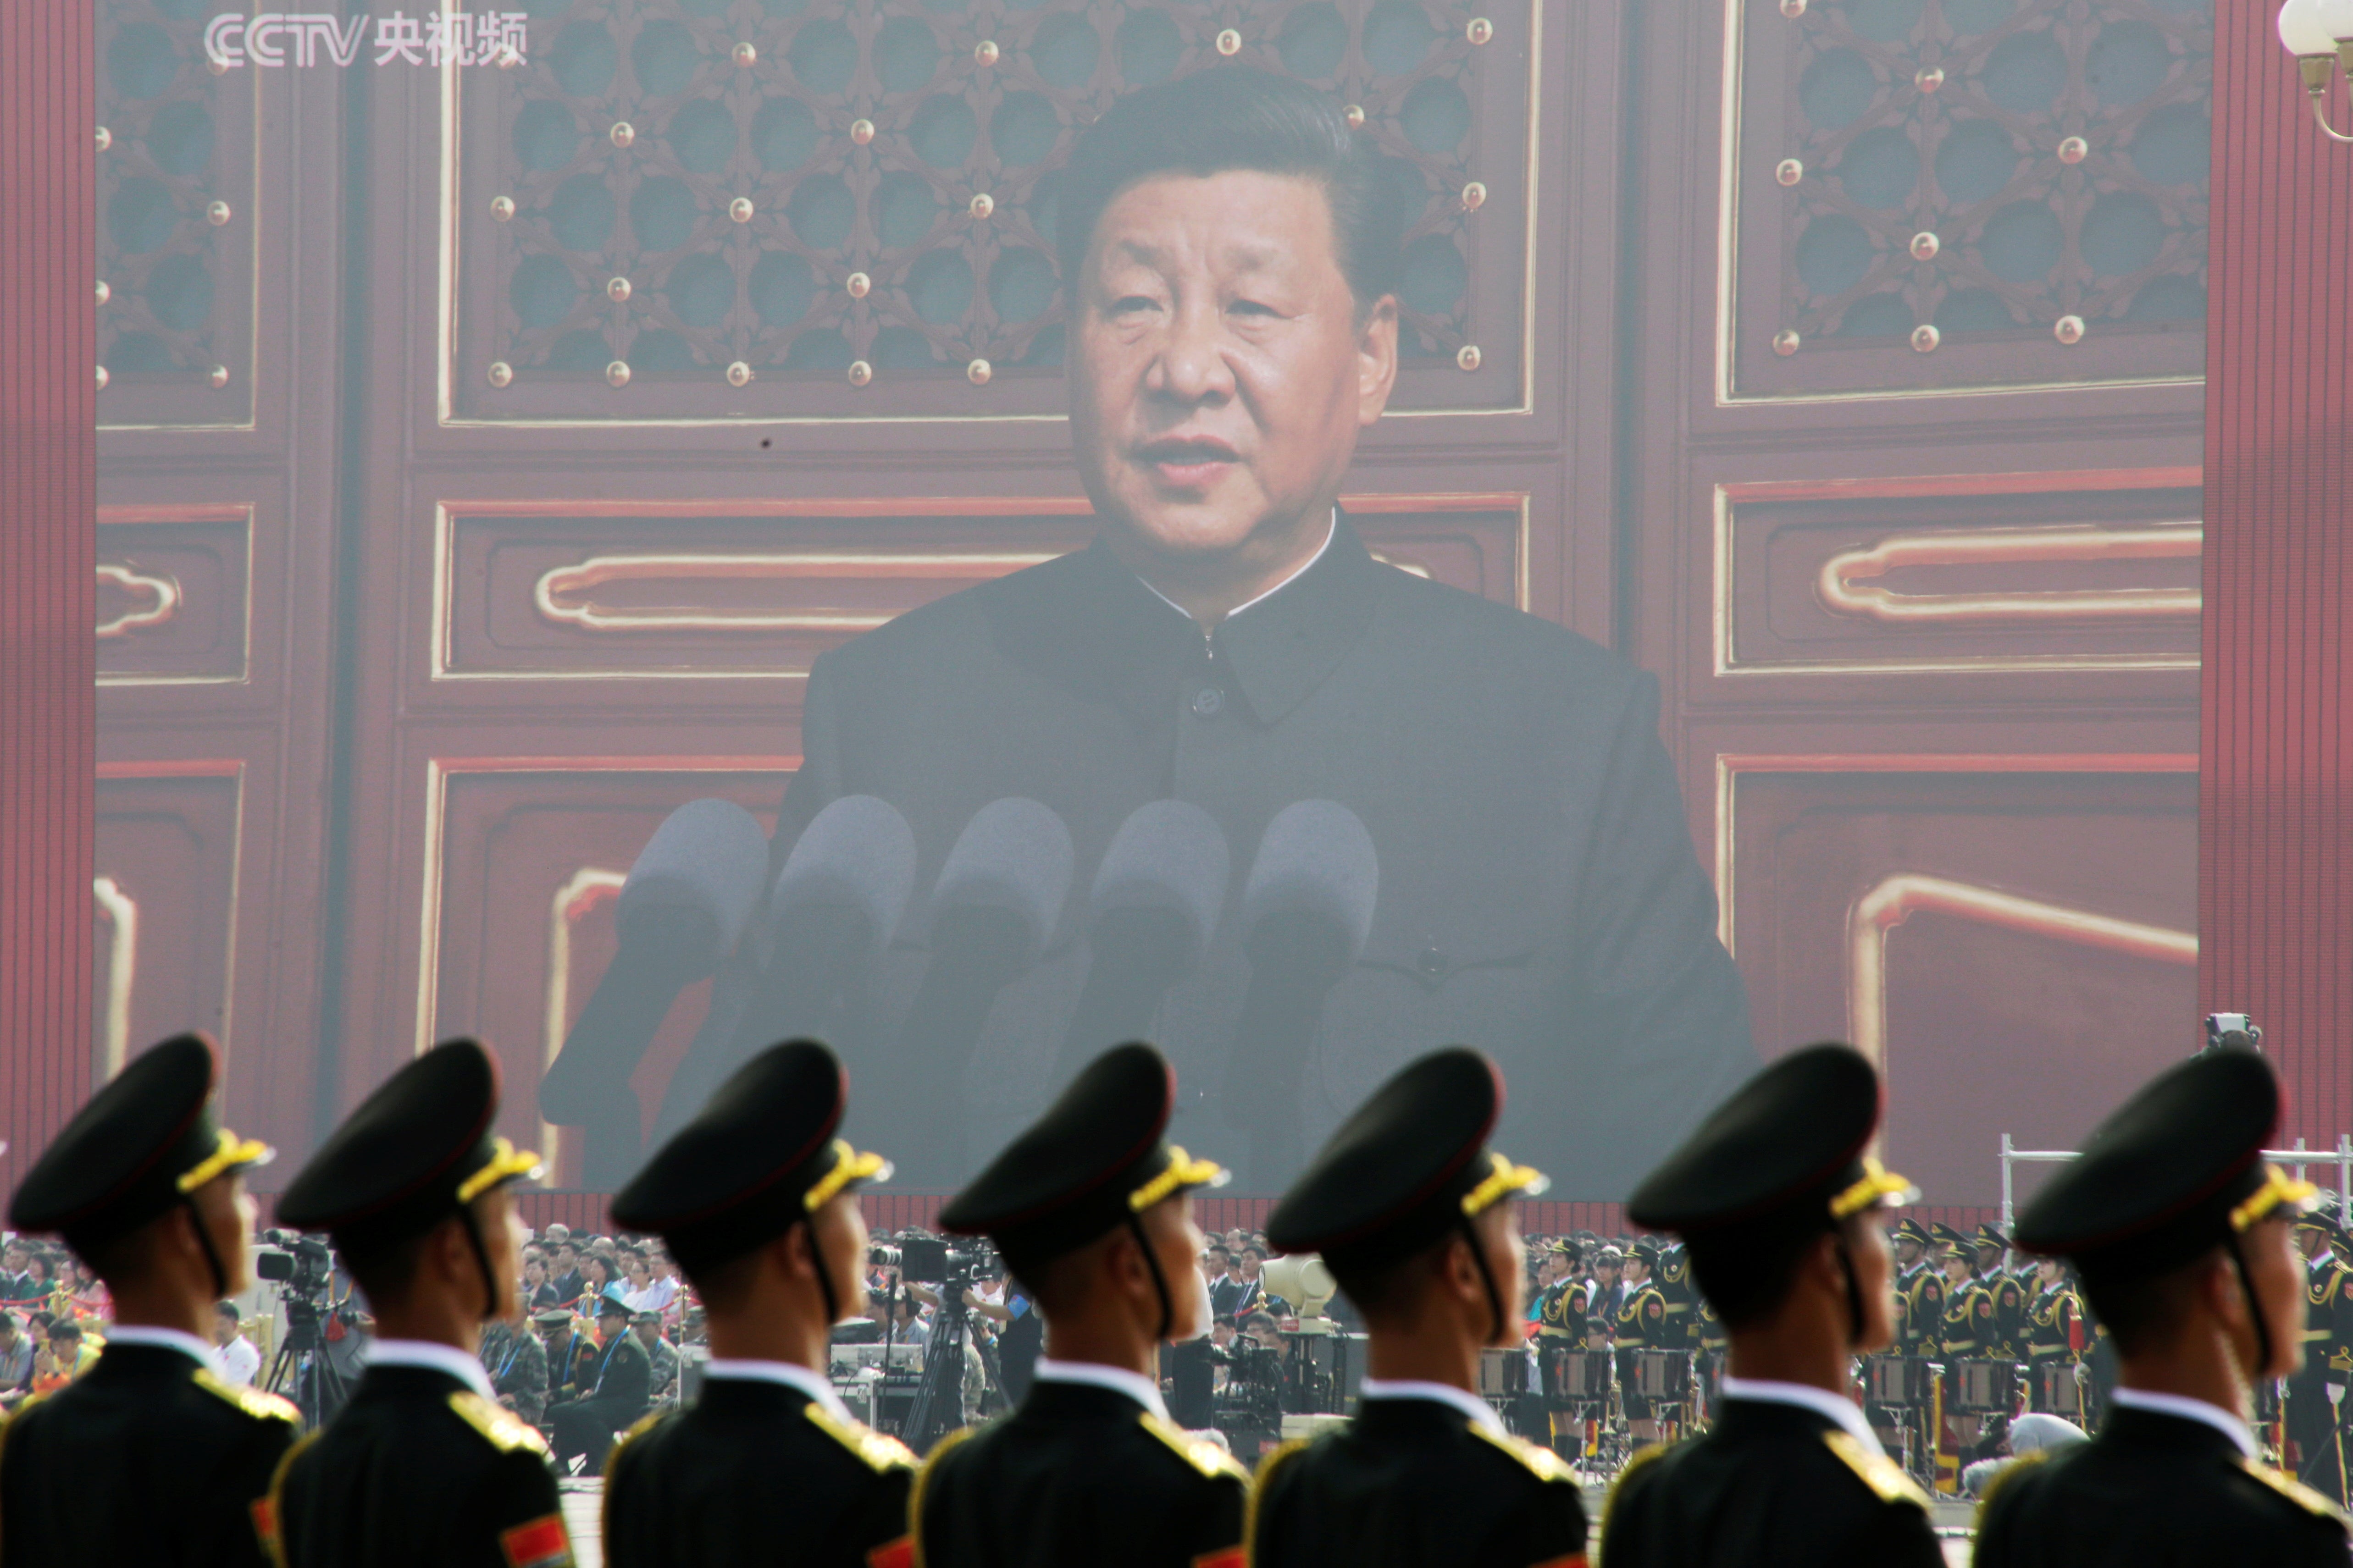 Soldiers of People's Liberation Army (PLA) are seen before a giant screen as Chinese President Xi Jinping speaks at the military parade marking the 70th founding anniversary of People's Republic of China, on its National Day in Beijing, China October 1, 2019